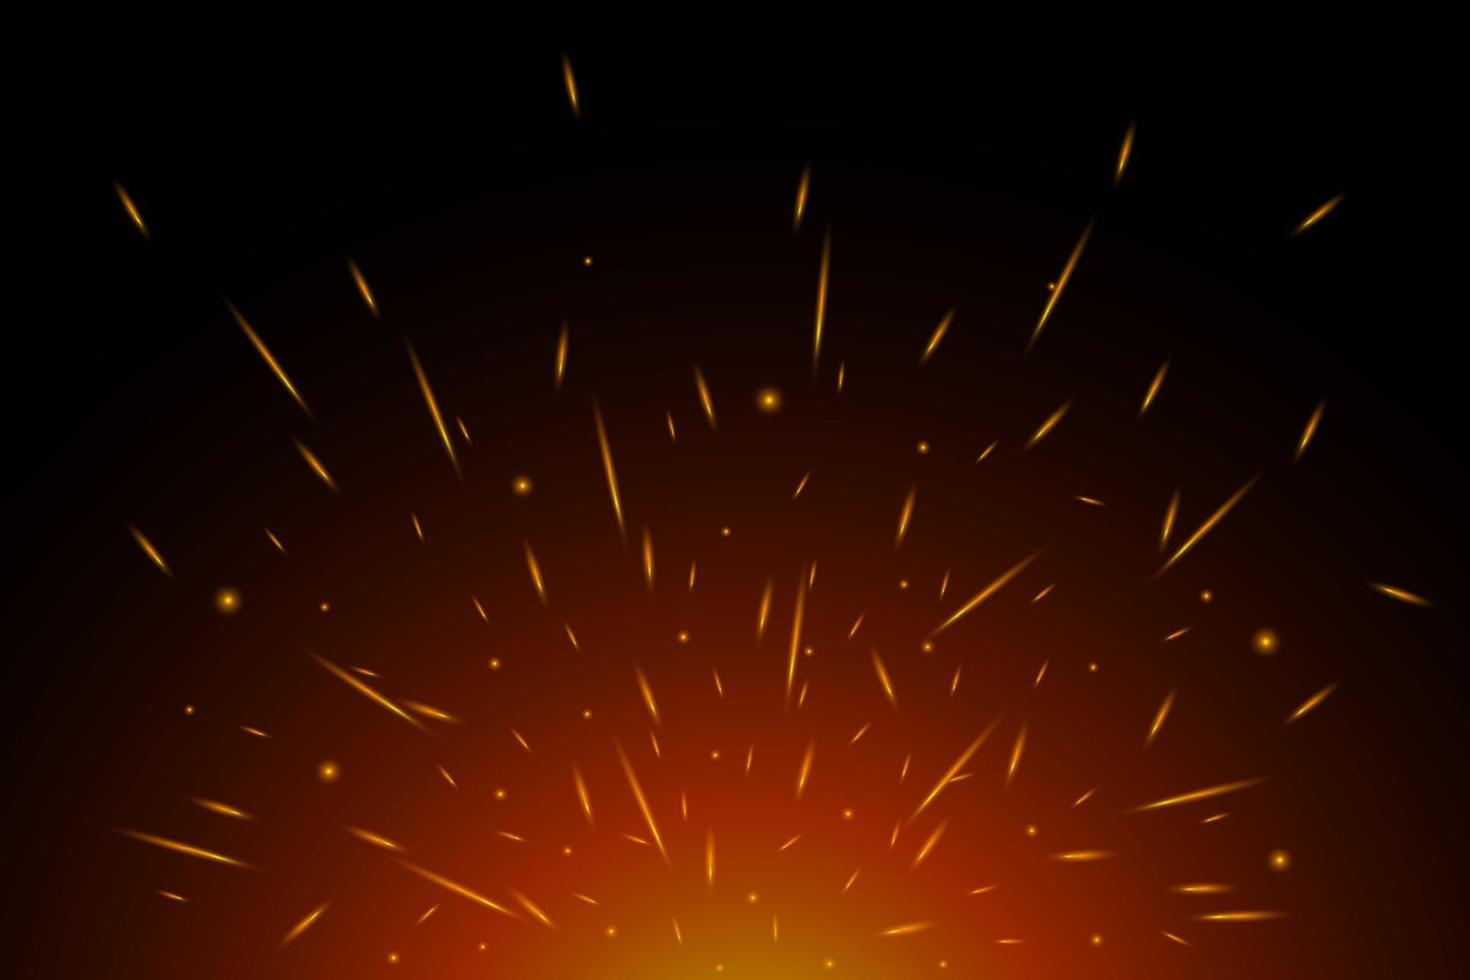 Fiery sparks on air over dark night. Flying glowing particles from fire. Flame lights effect on black background vector eps illustration